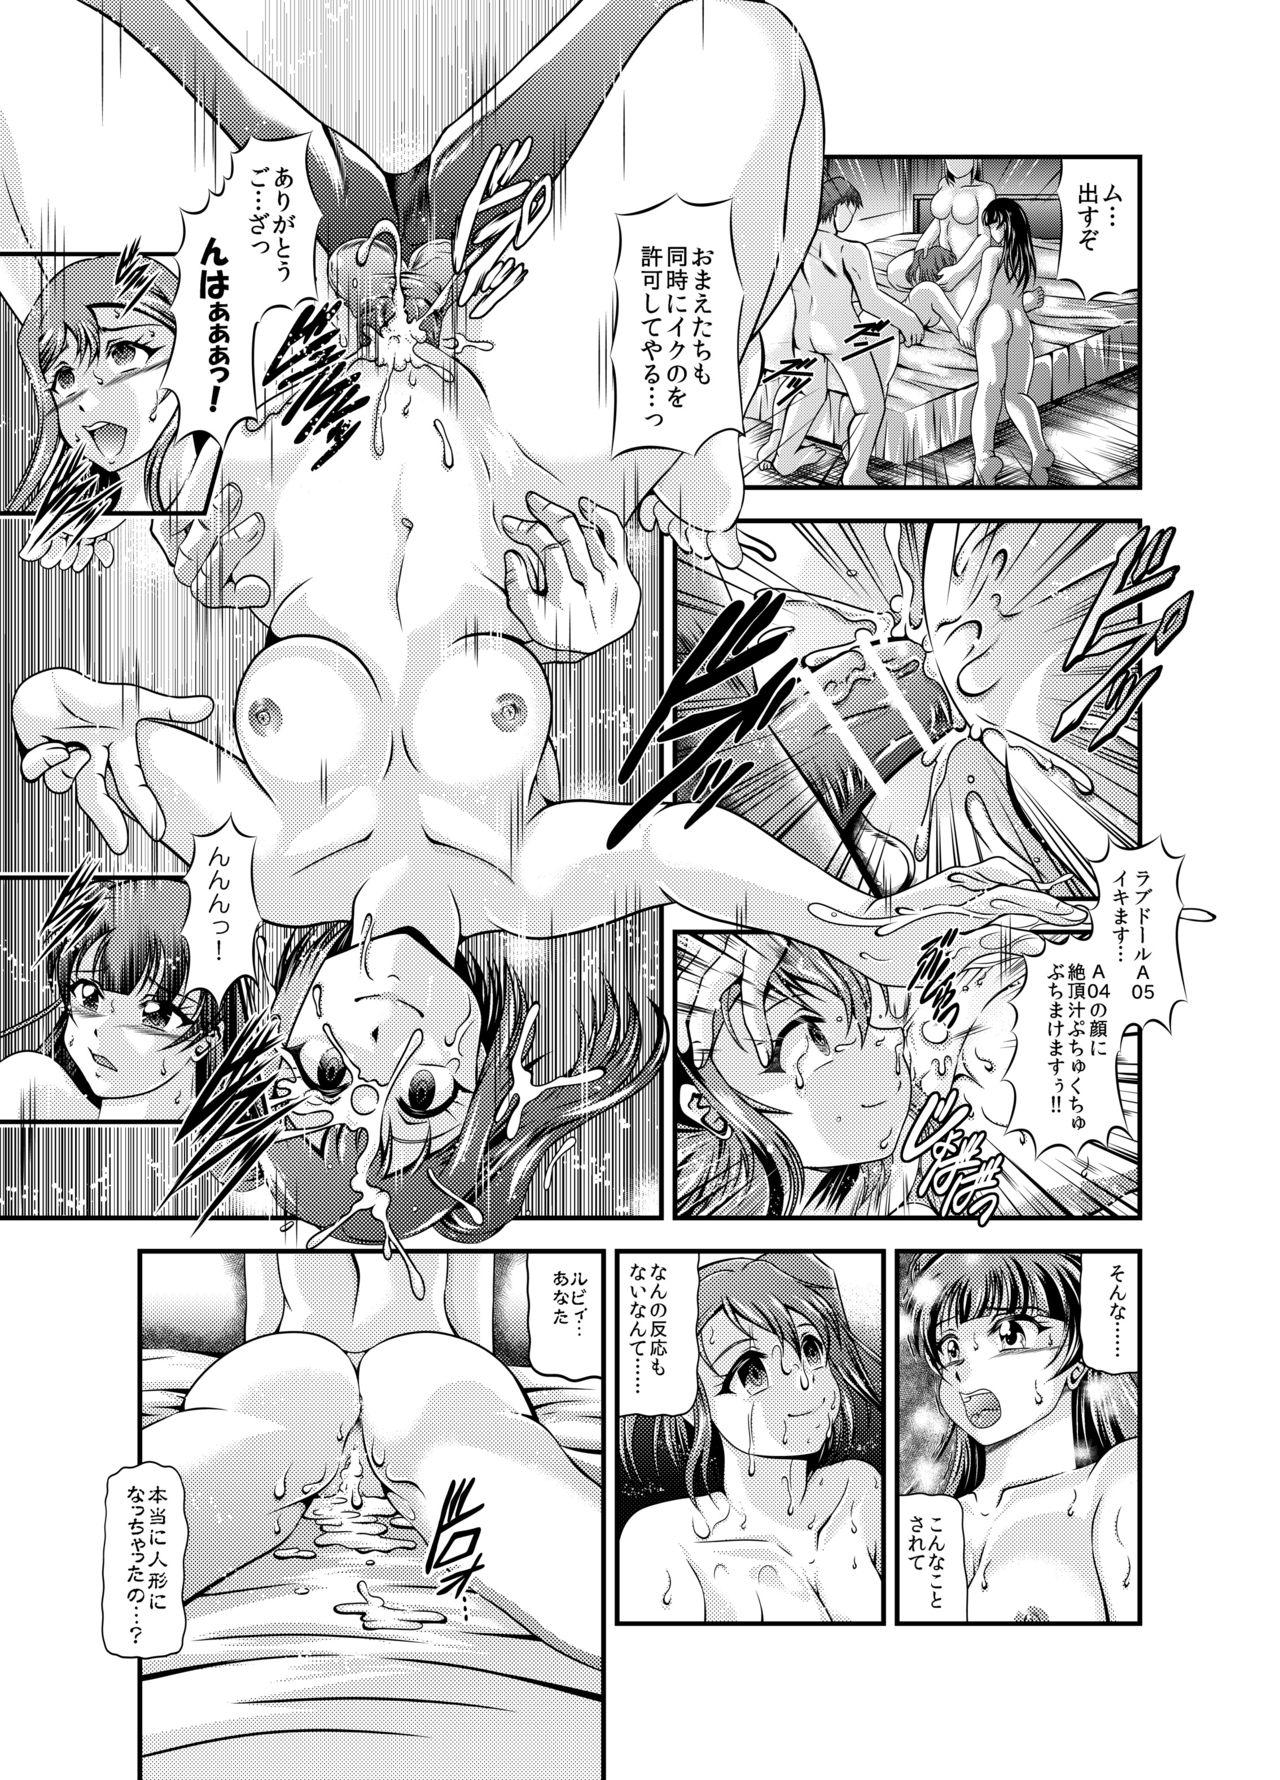 Public Nudity ProjectAqours EP03:“L”OVEDOLLS - Love live 3some - Page 11